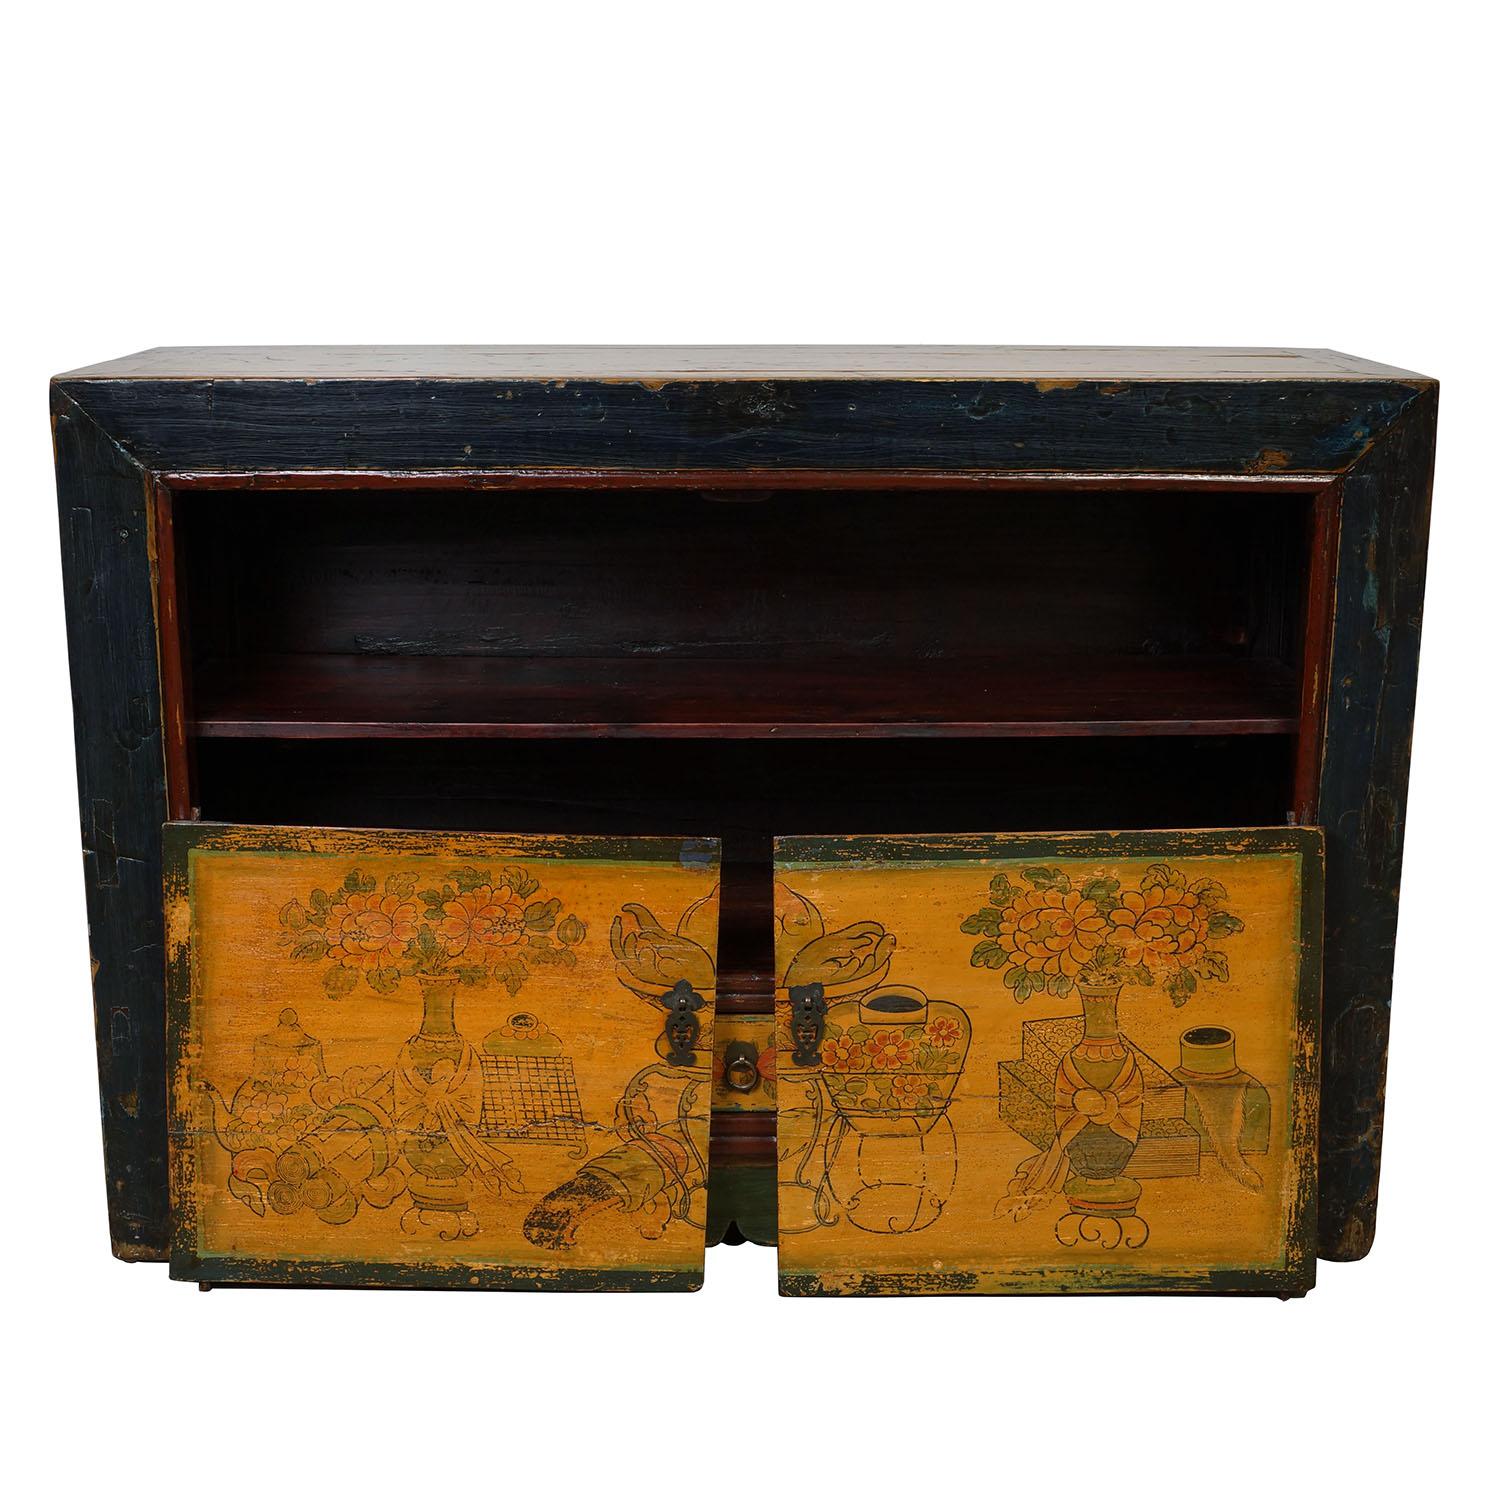 Chinese Export Late 19th Century Antique Chinese Mongolia Cabinet/Buffet Table, Sideboard For Sale